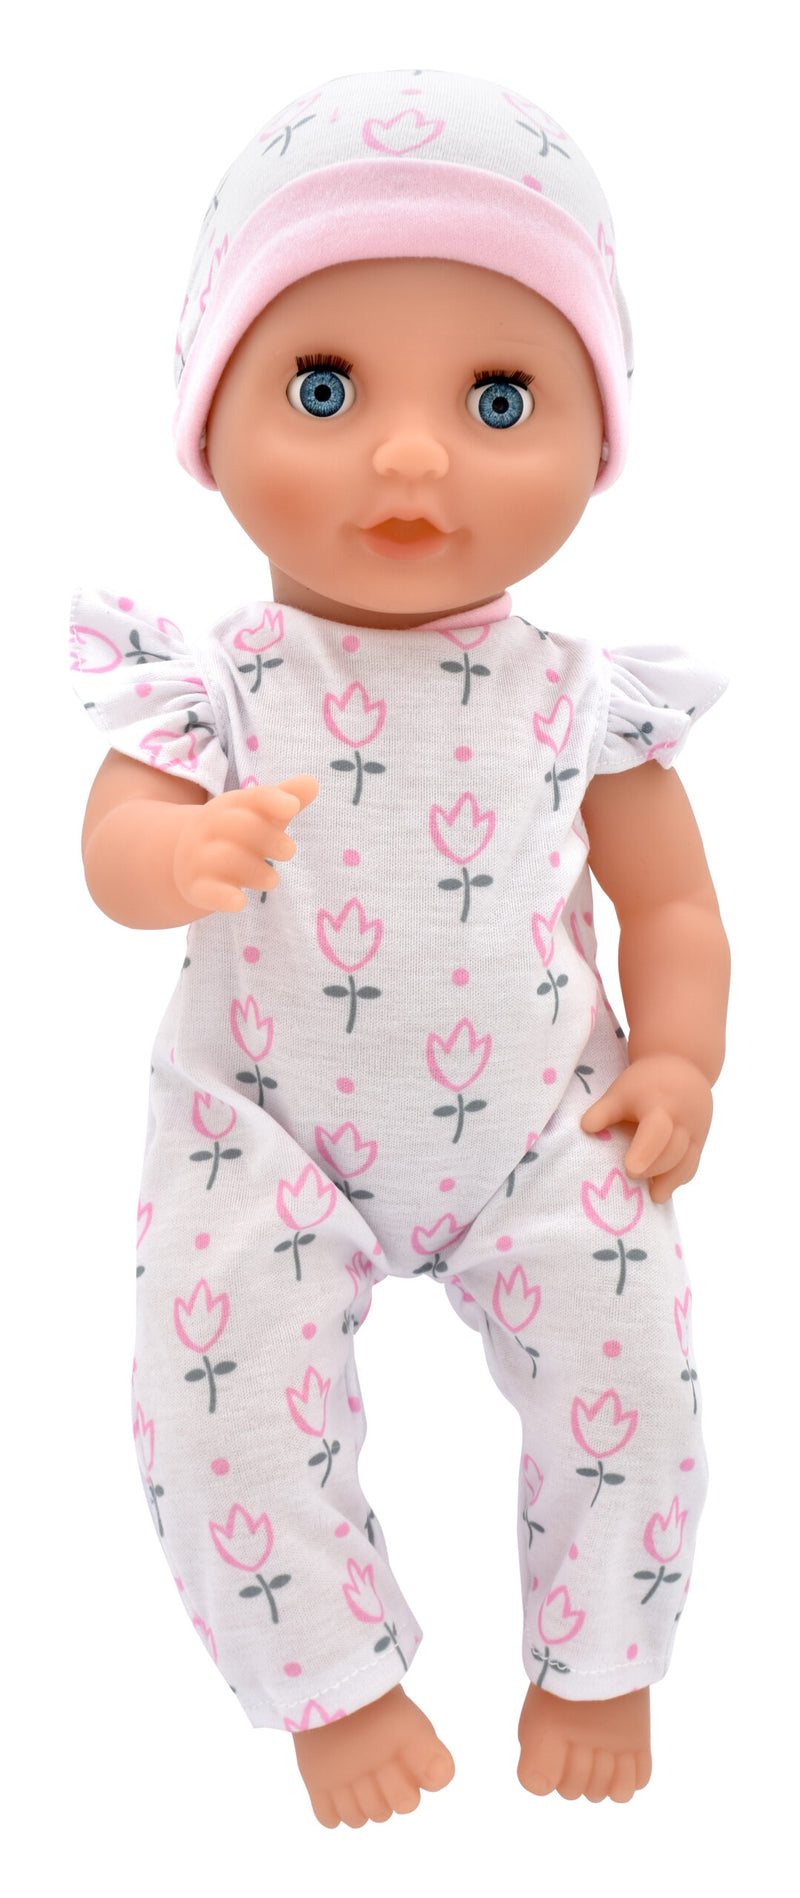 Dolllsworld Baby Tinkles Drink and Wet  Doll 38cm (15") with Accessories